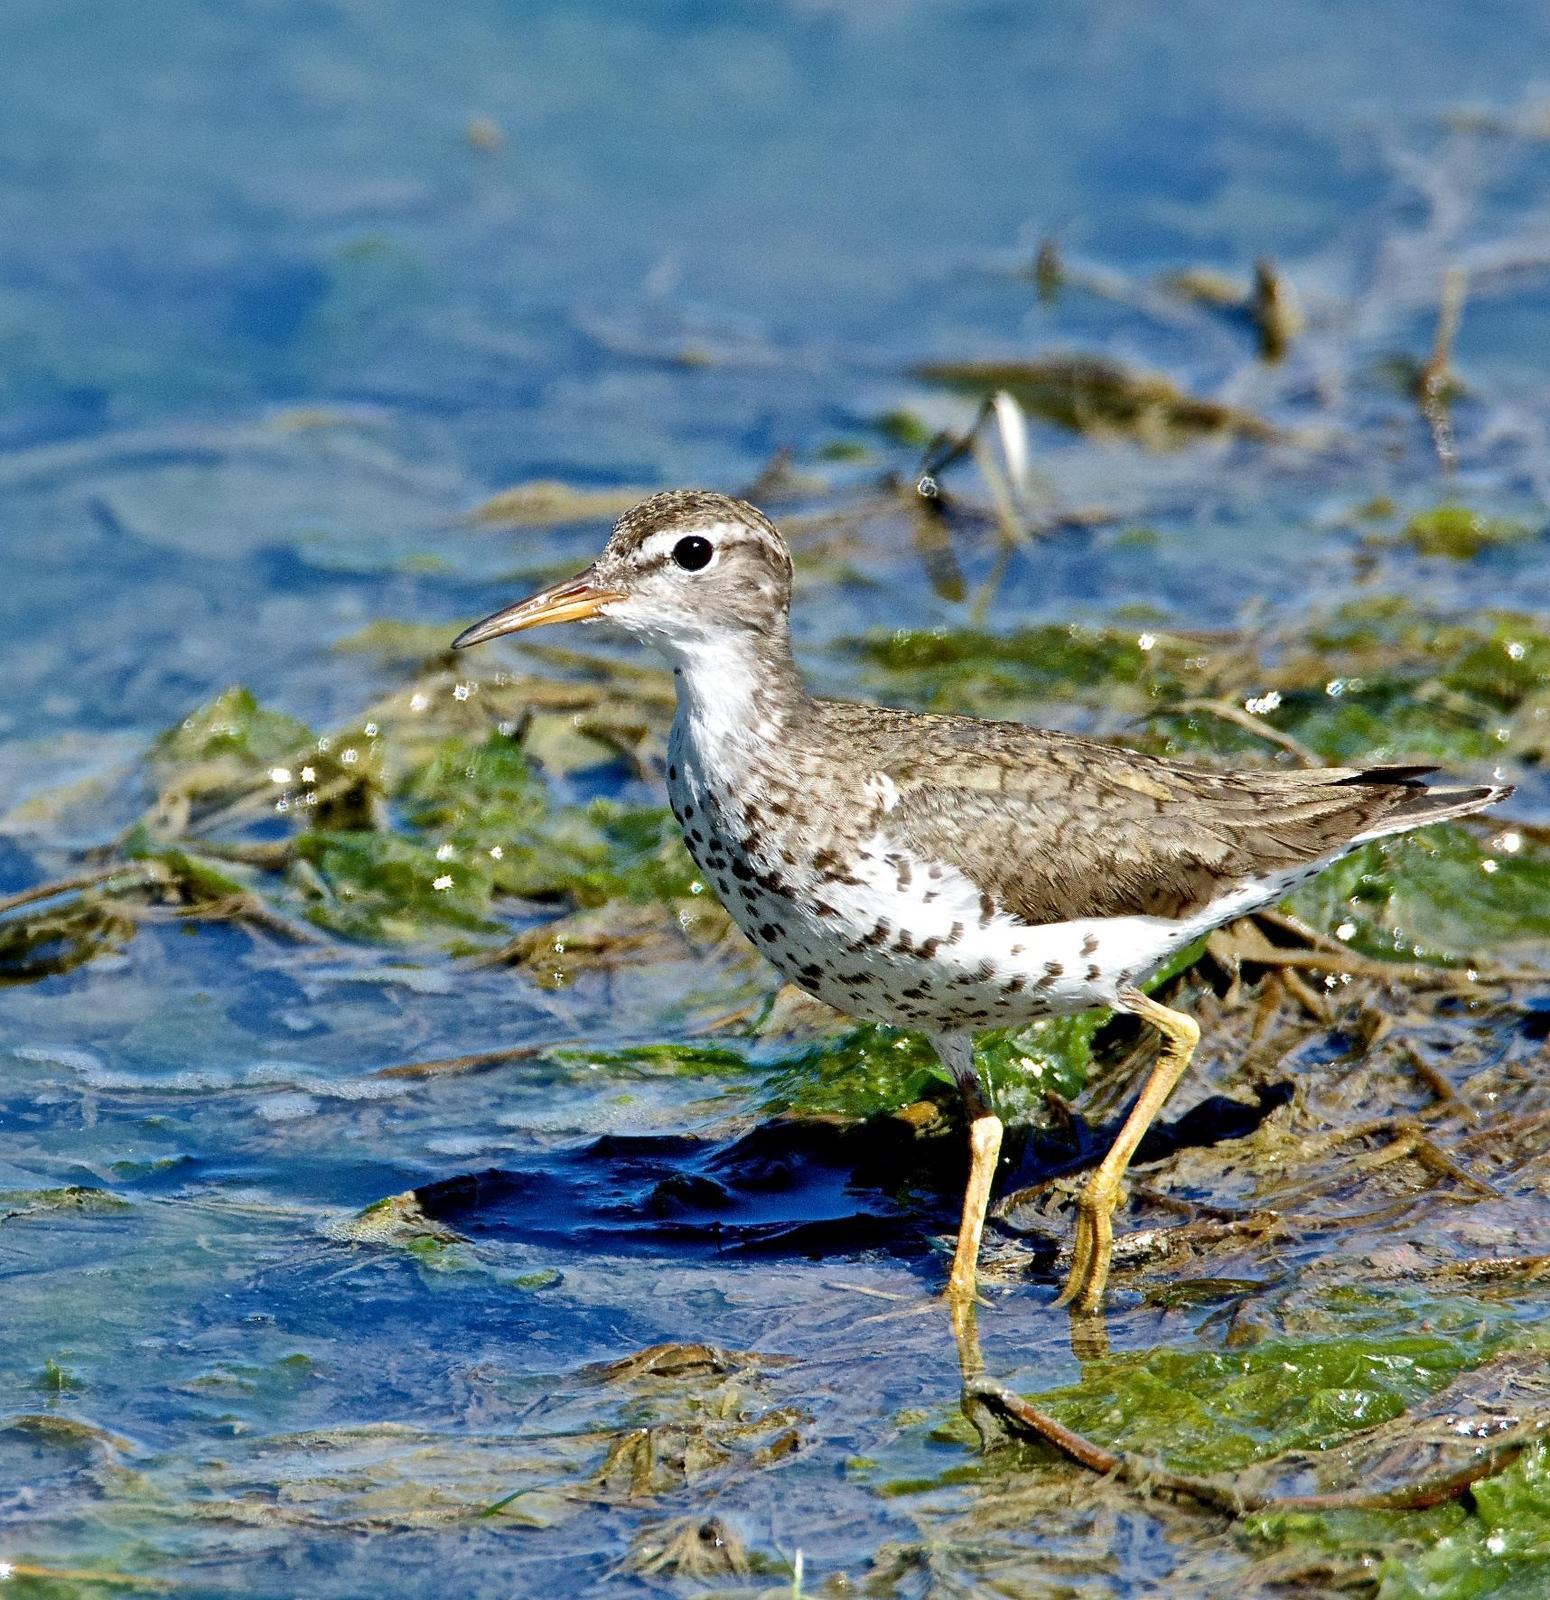 Spotted Sandpiper Photo by Brian Avent